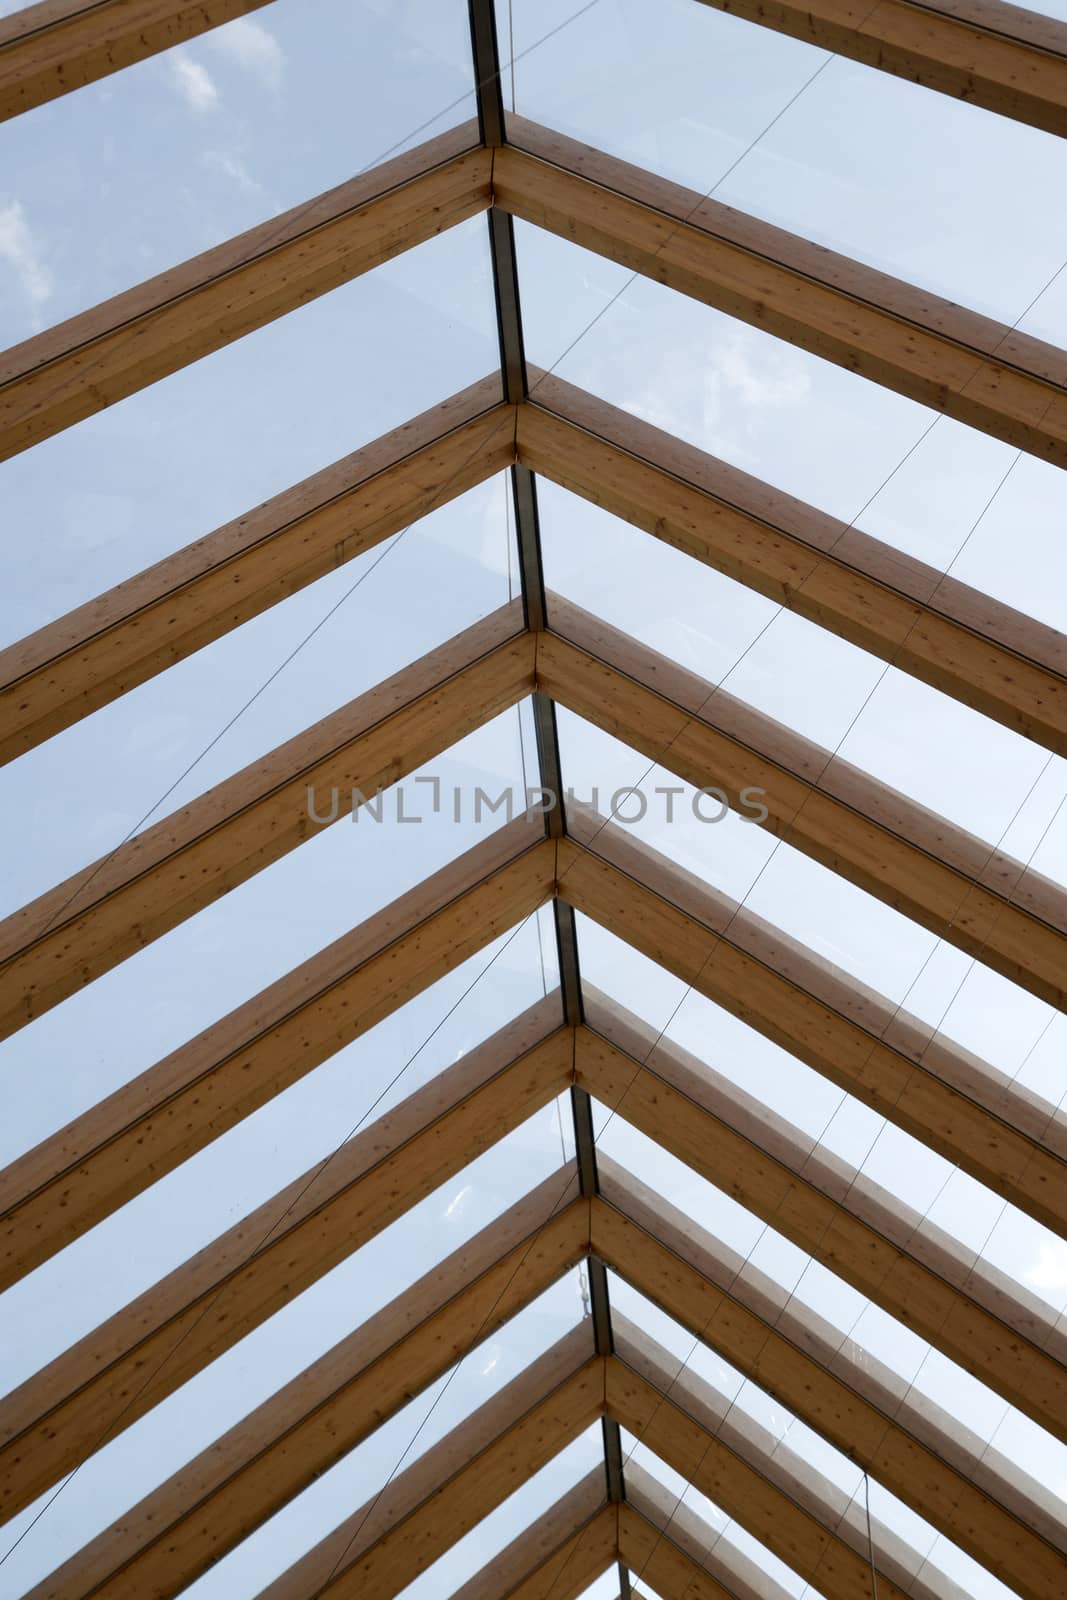 Modern cover made of laminated beams and glass plates